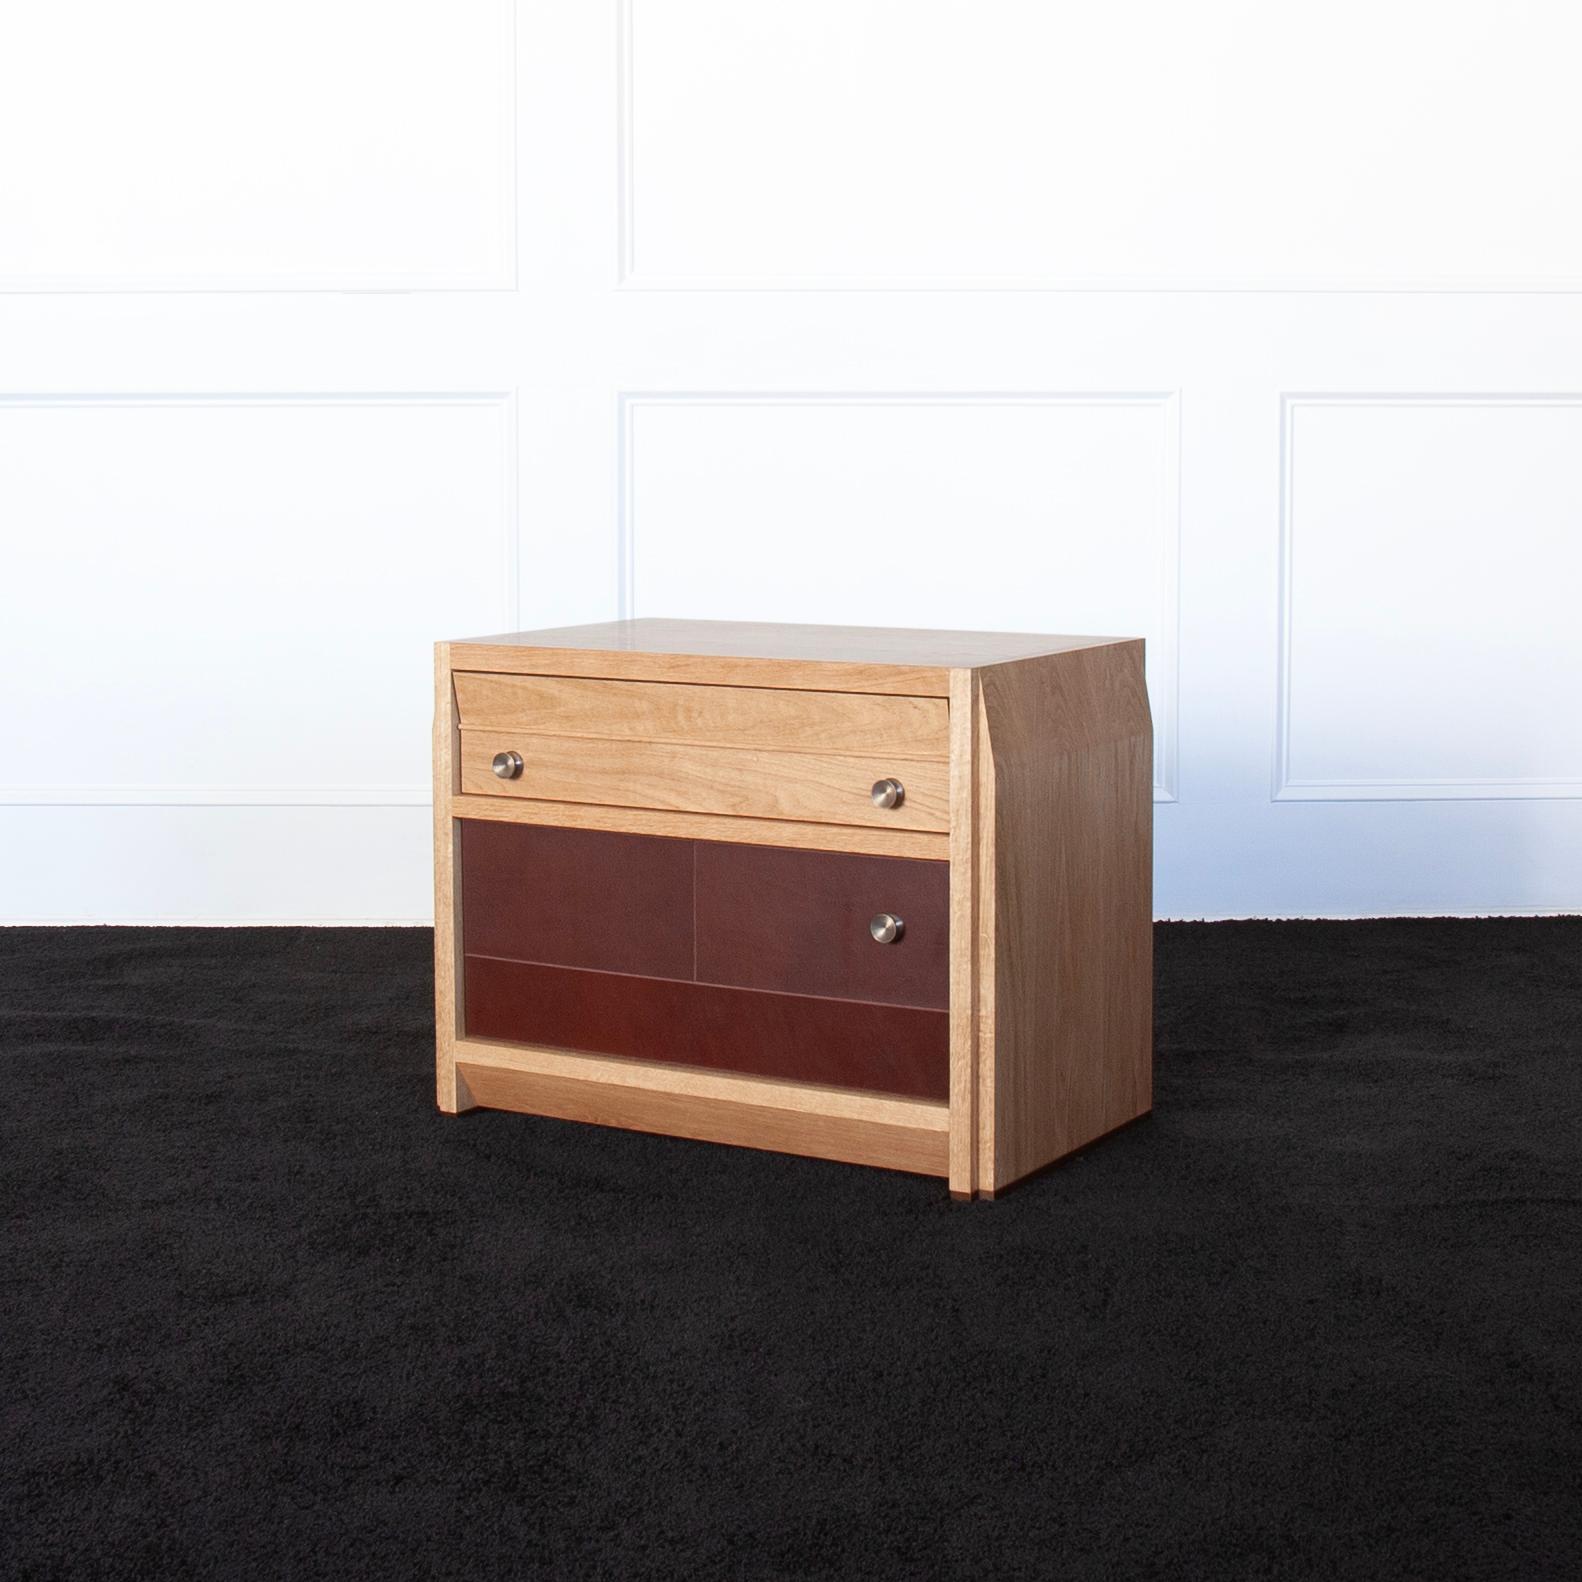 Octavia Nightstand by Crump & Kwash 

Features a solid wood case / oiled or acrylic finish / patinated solid brass pulls / premium, full extension, soft close drawer slides / solid maple, dovetailed drawer box / veg tan leather door